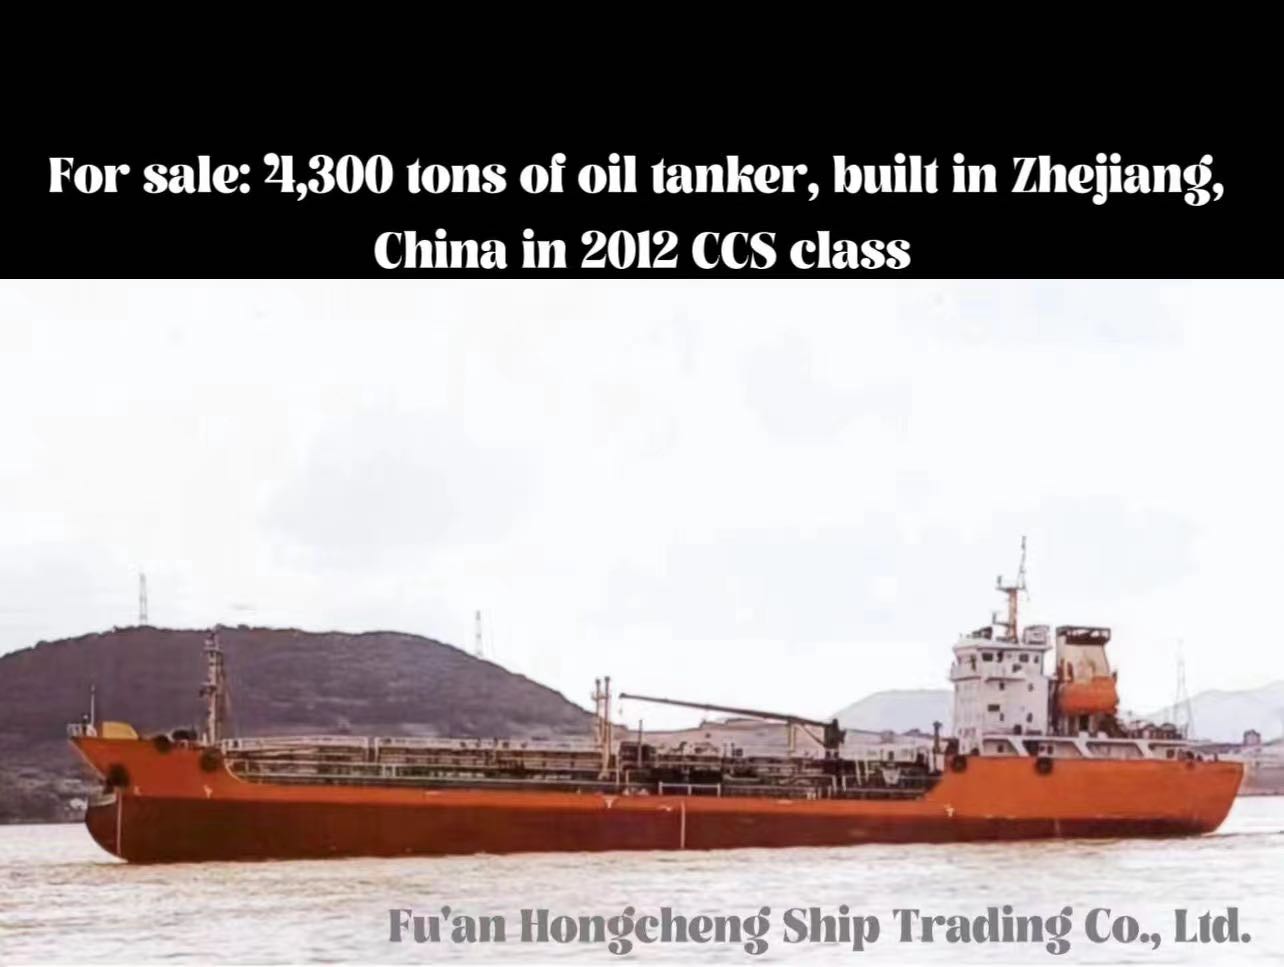 For sale: 4,300 tons of oil tanker, built in Zhejiang, China in 2012 CCS class